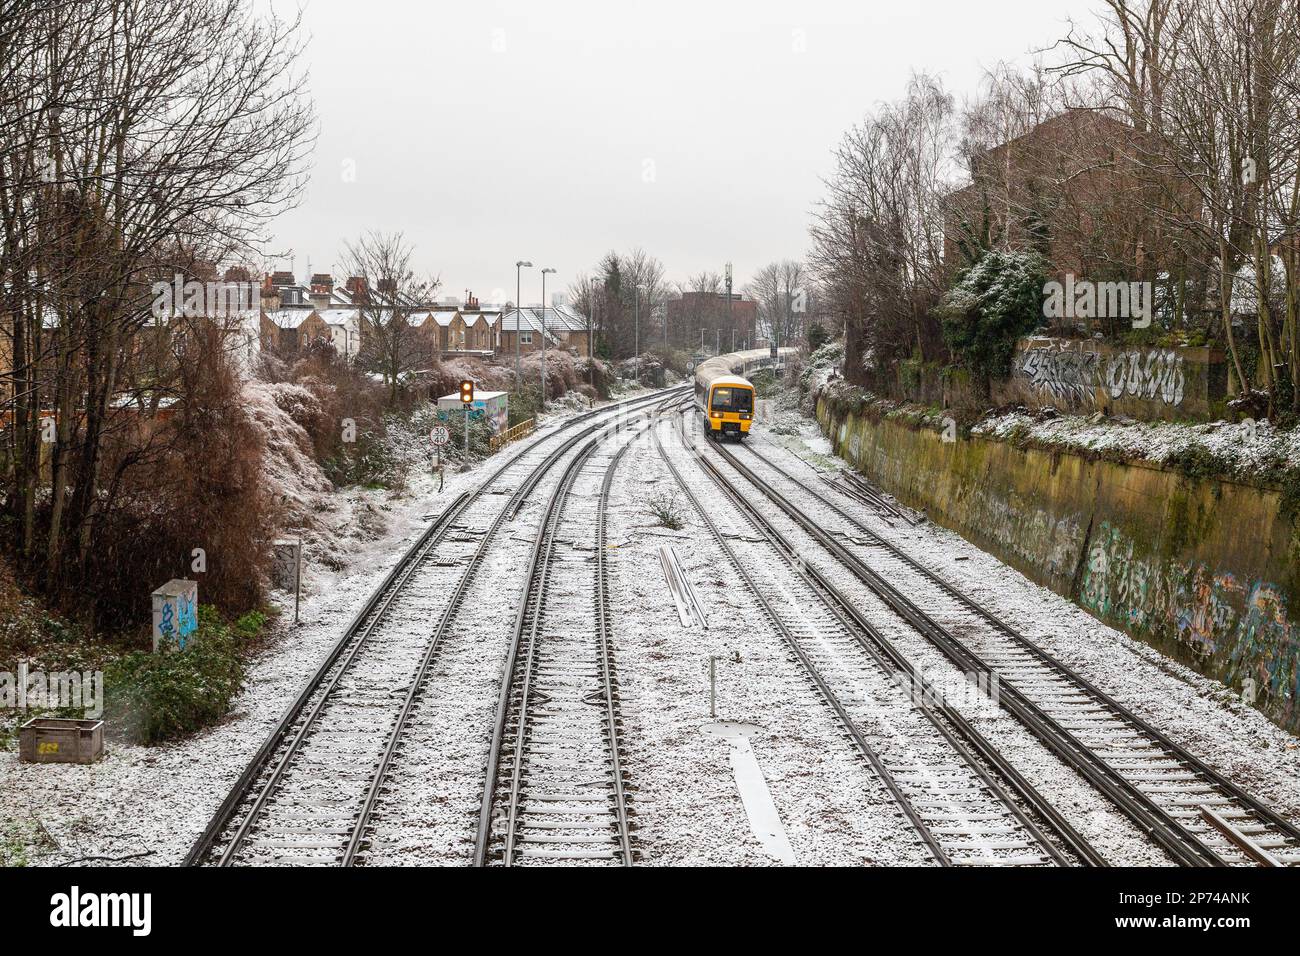 LONDON, UK - 8TH MAR 2023: A train on the railways in London during a snowy winter day. Stock Photo